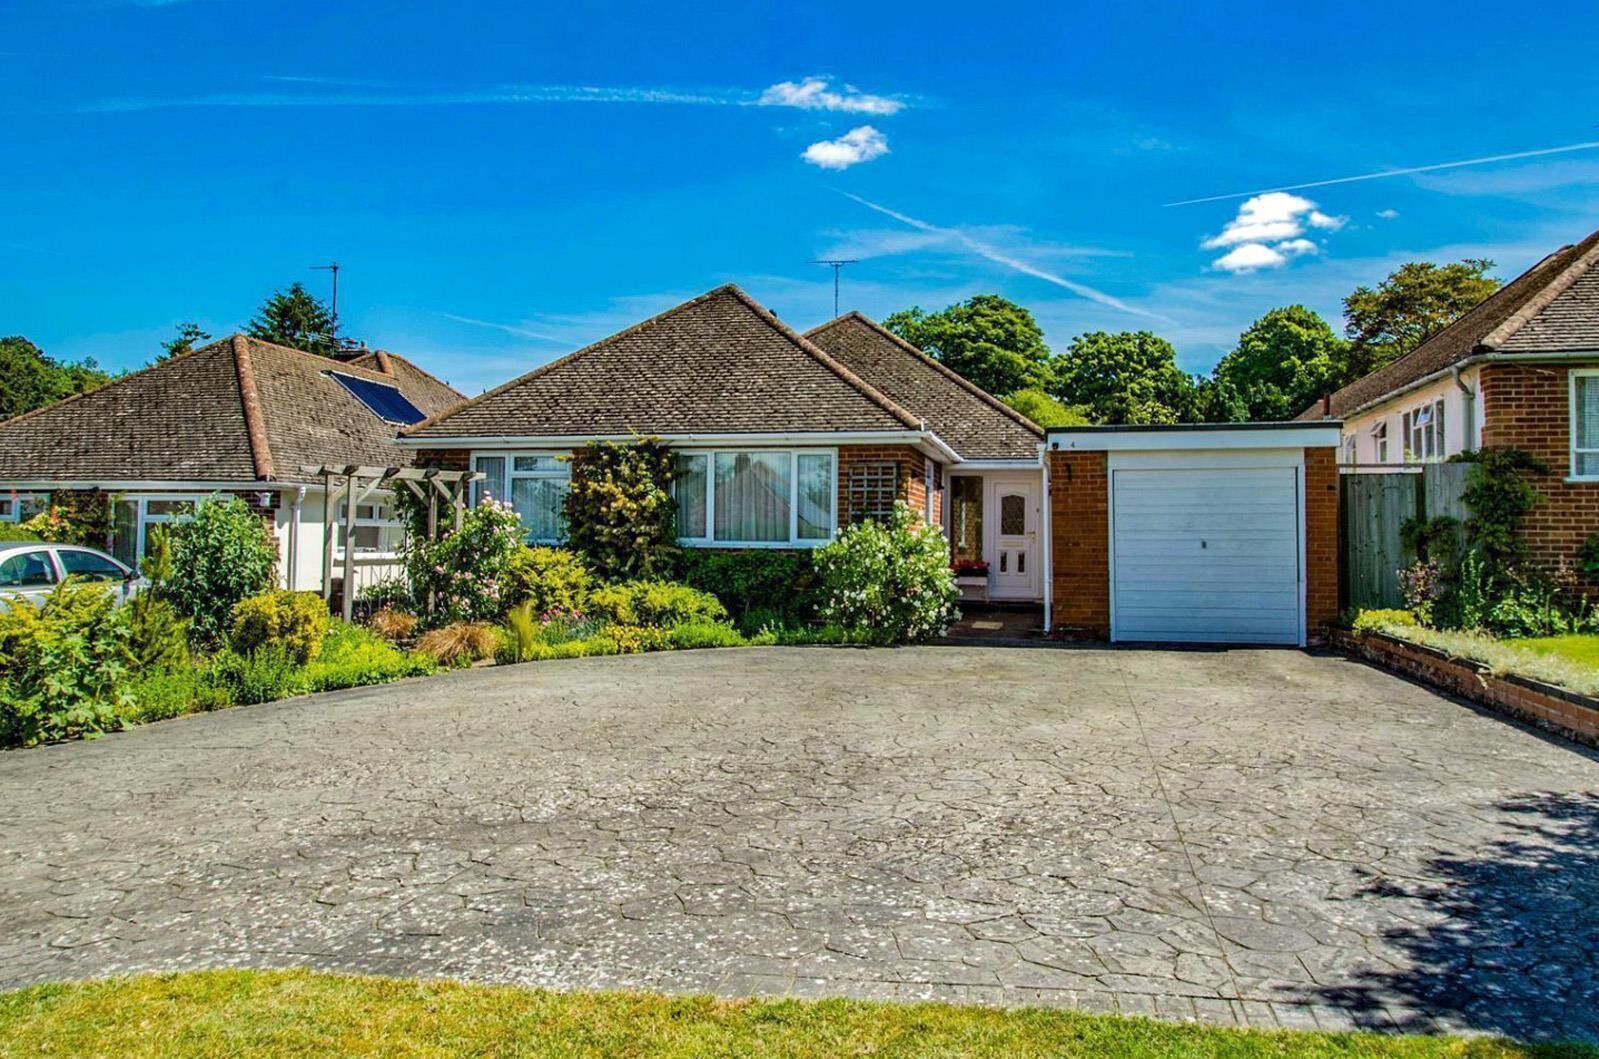 4 bedroom detached house for sale Summerfield Rise, Goring-on-Thames, RG8, main image